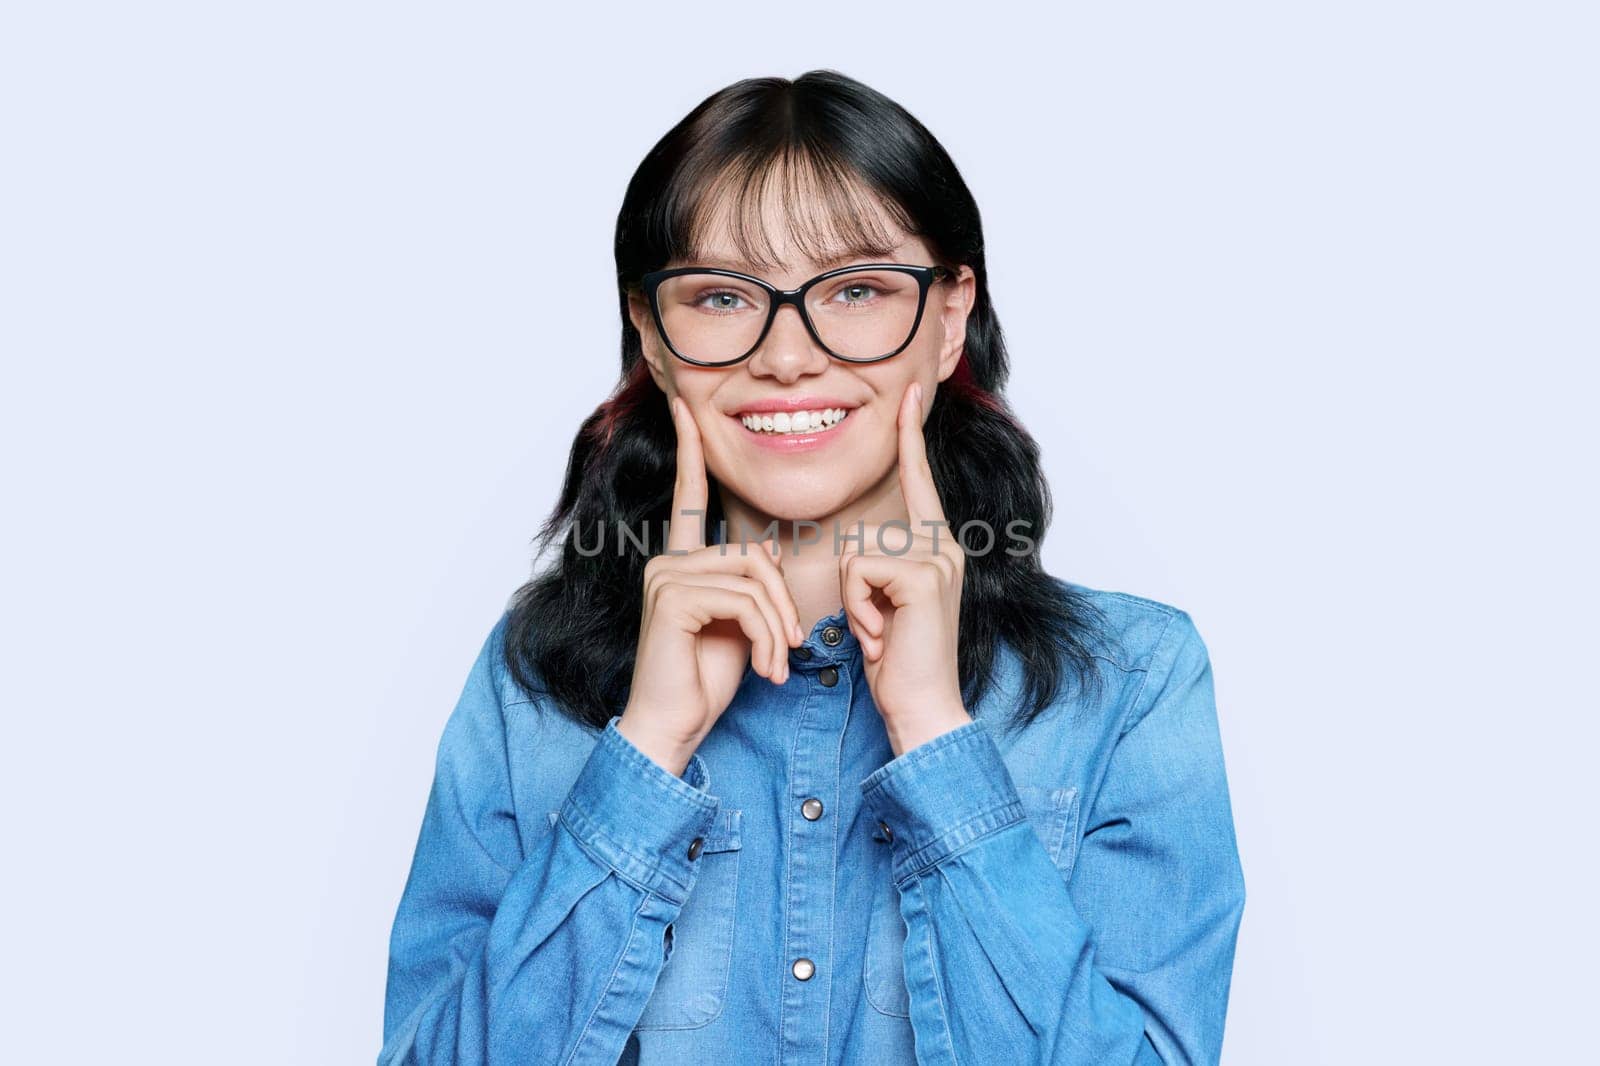 Young woman showing smile with teeth, on white background by VH-studio